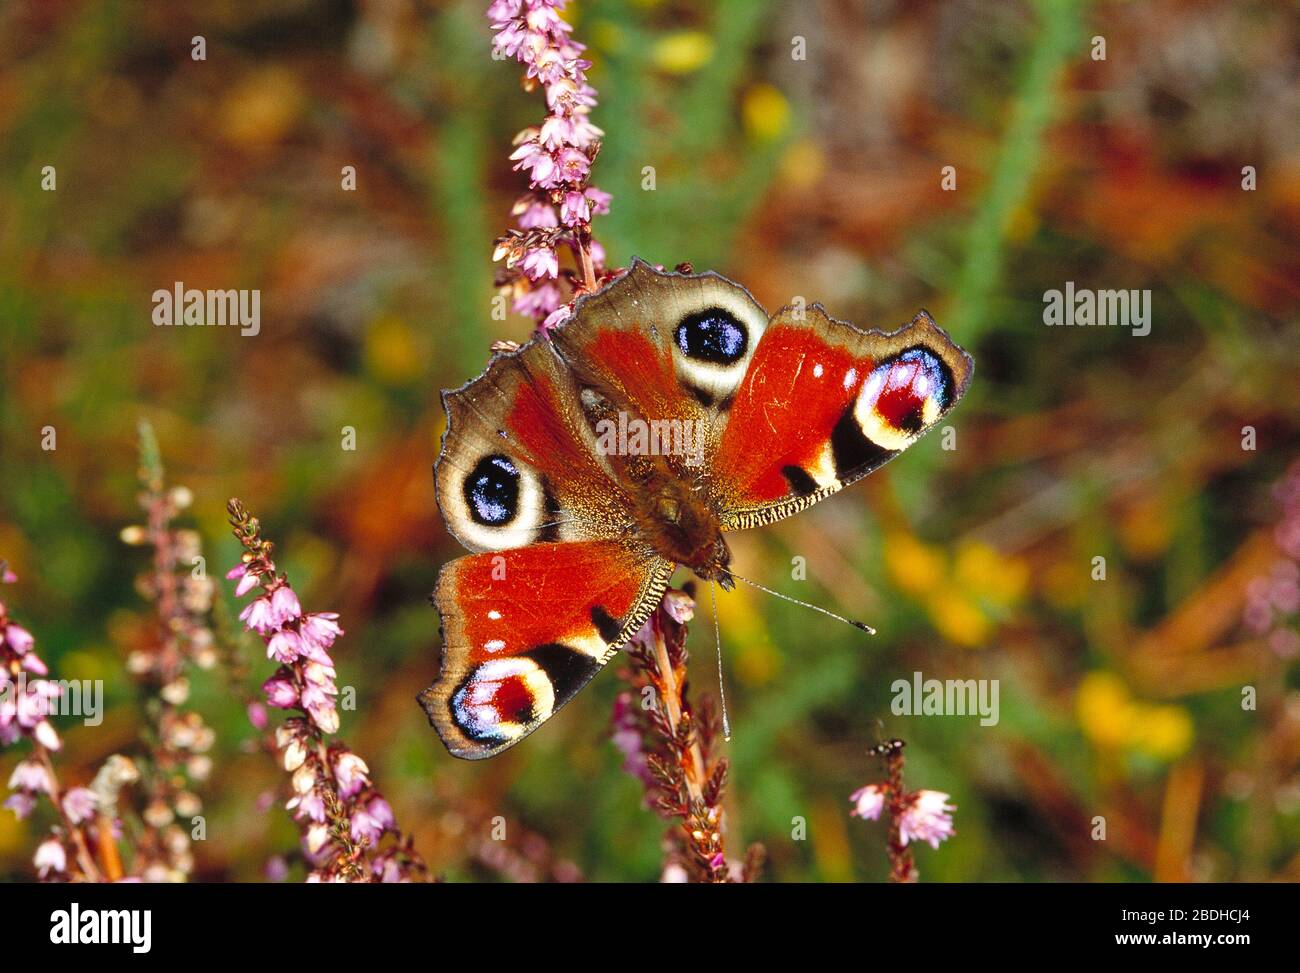 Guernsey. Wildlife. Insects. Peacock Butterfly (Aglais io). Stock Photo